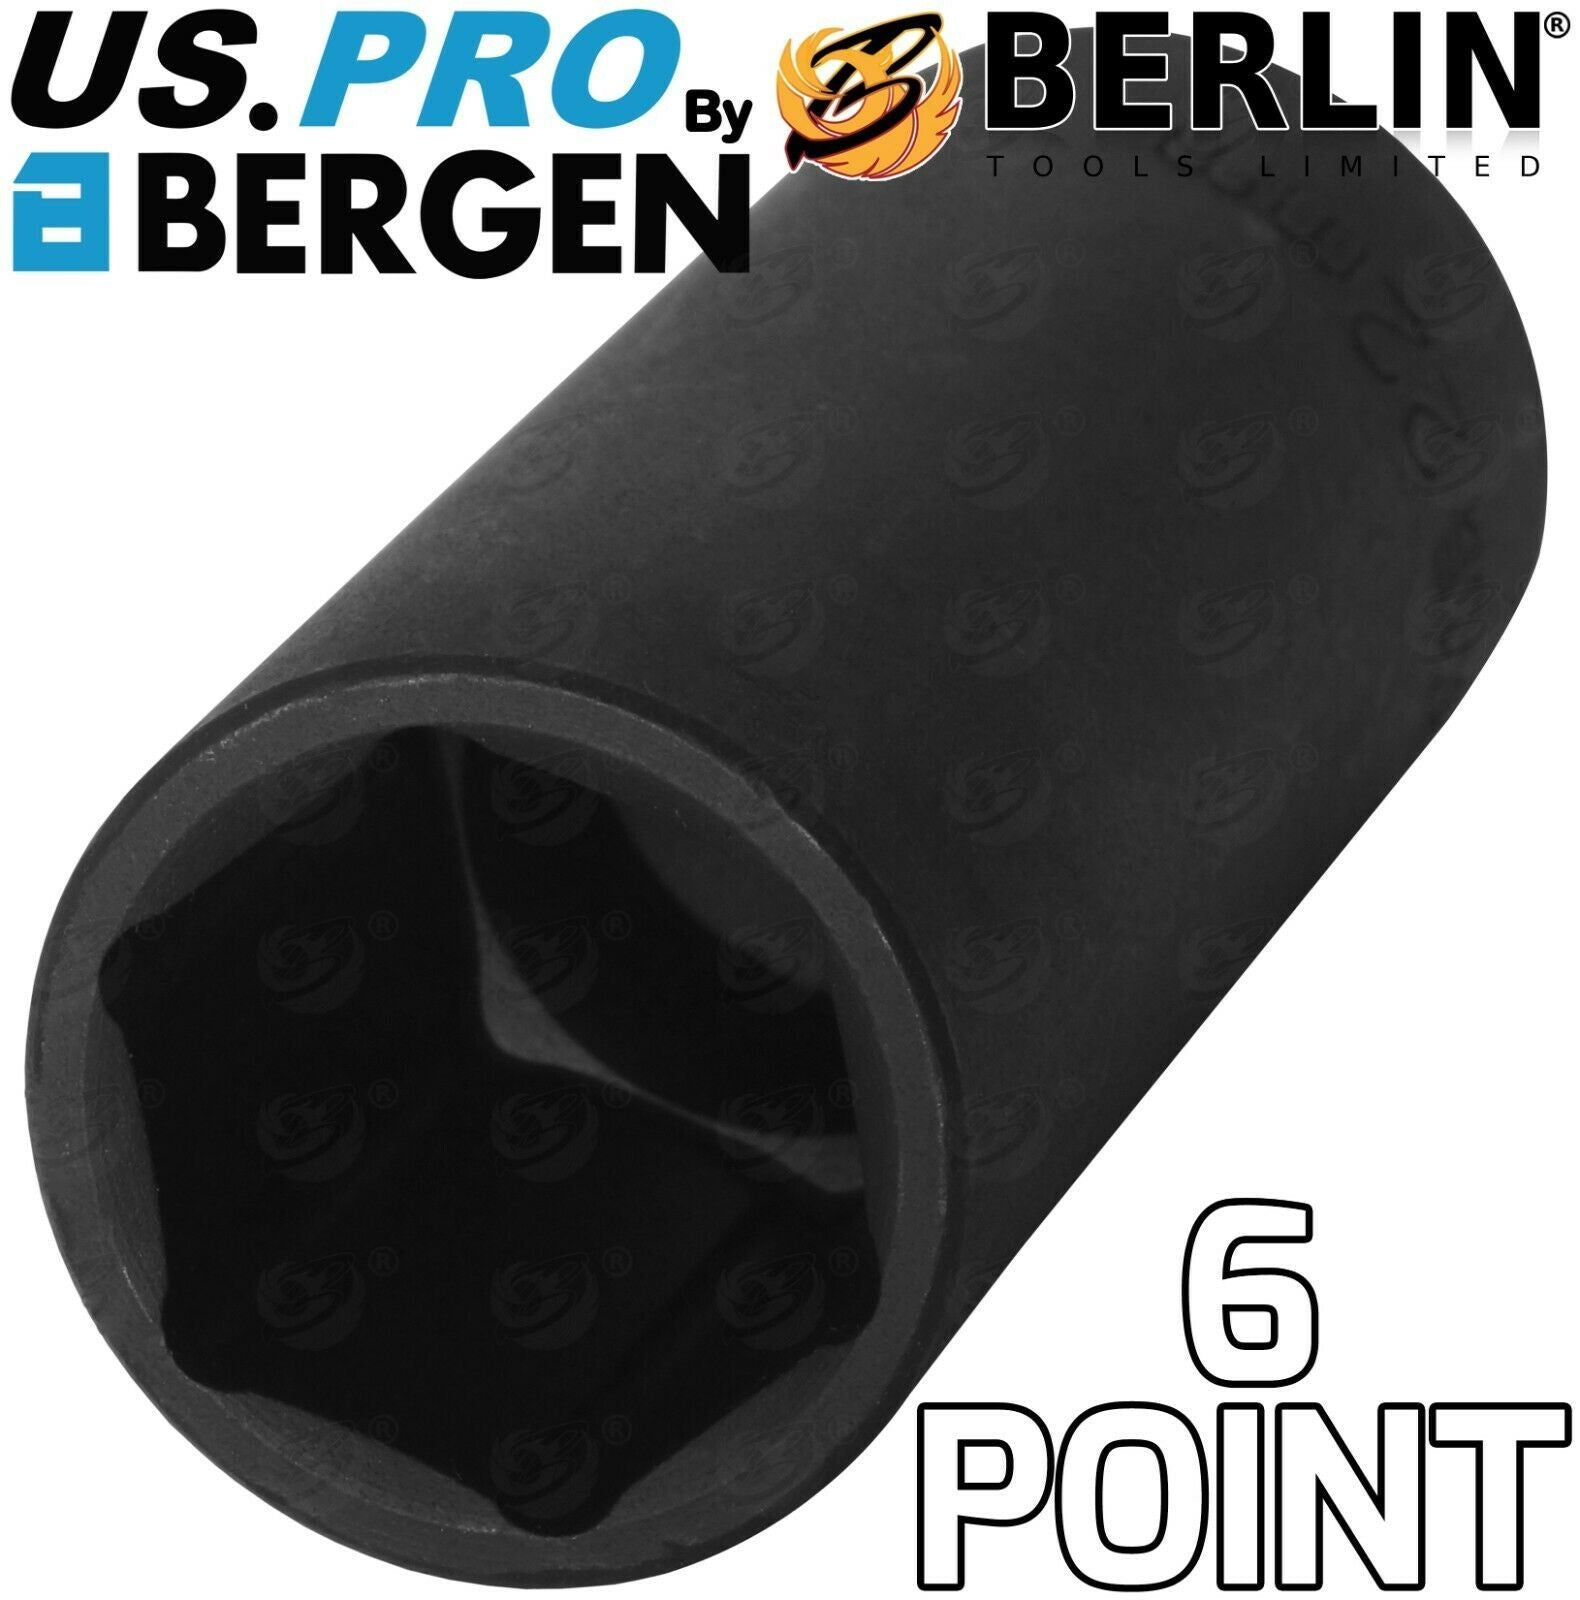 US PRO 1/2" DRIVE 6 POINT DEEP IMPACT SOCKETS & EXTENSIONS 10MM - 24MM